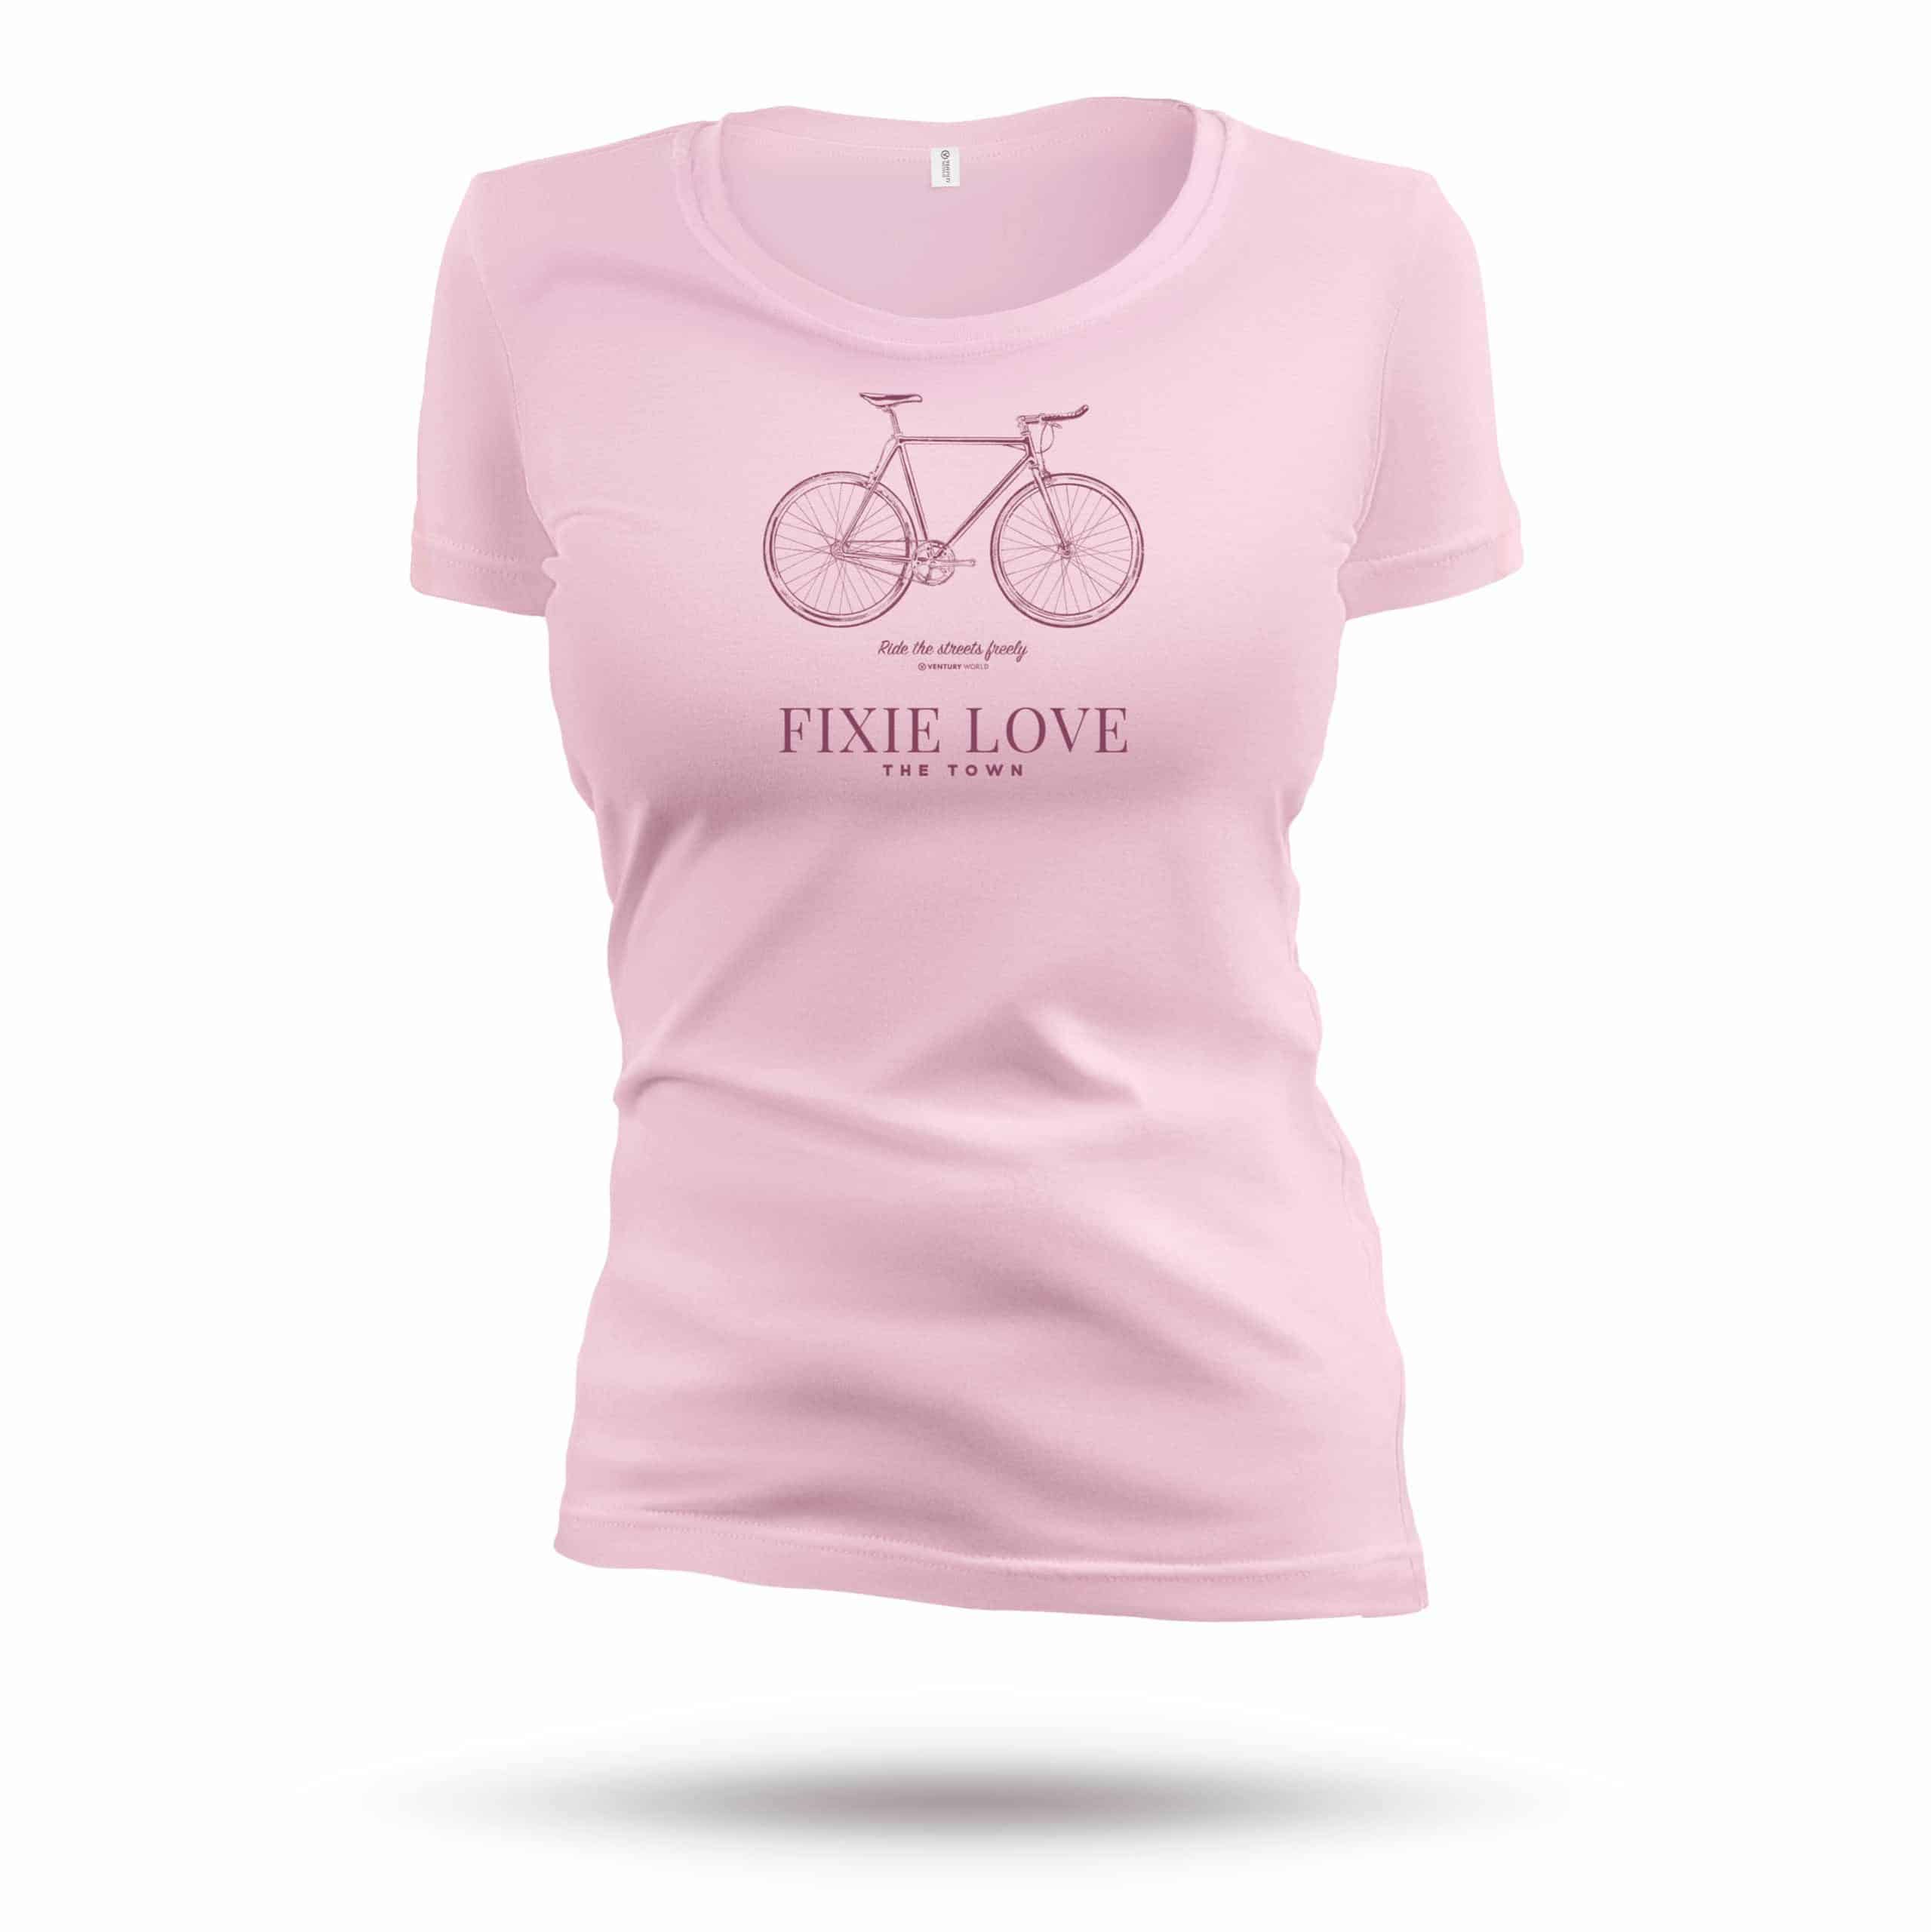 T-shirt cycling femme - Fixie Bike femme - Ride the streets freely - collection tee shirt Live freely 100% Naturel coupe ajustée grand col rond .